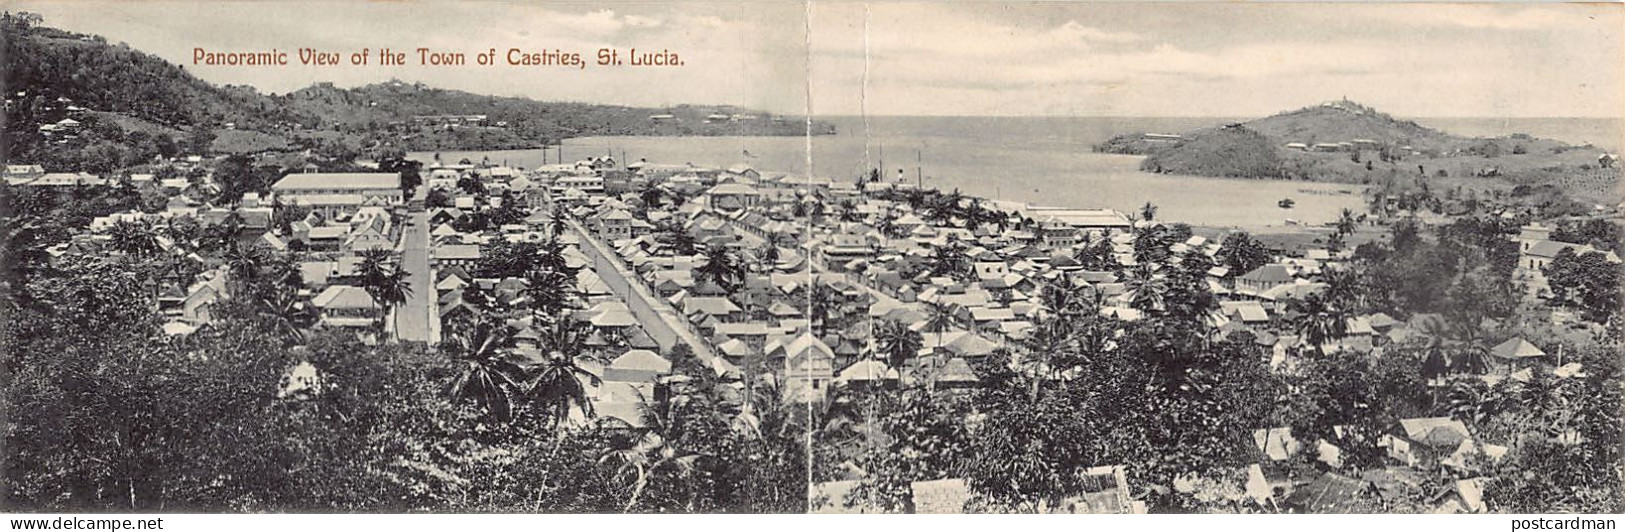 Saint Lucia - CASTRIES - Panoramic View - DOUBLE POSTCARD - Publ. Westall & Co.  - St. Lucia